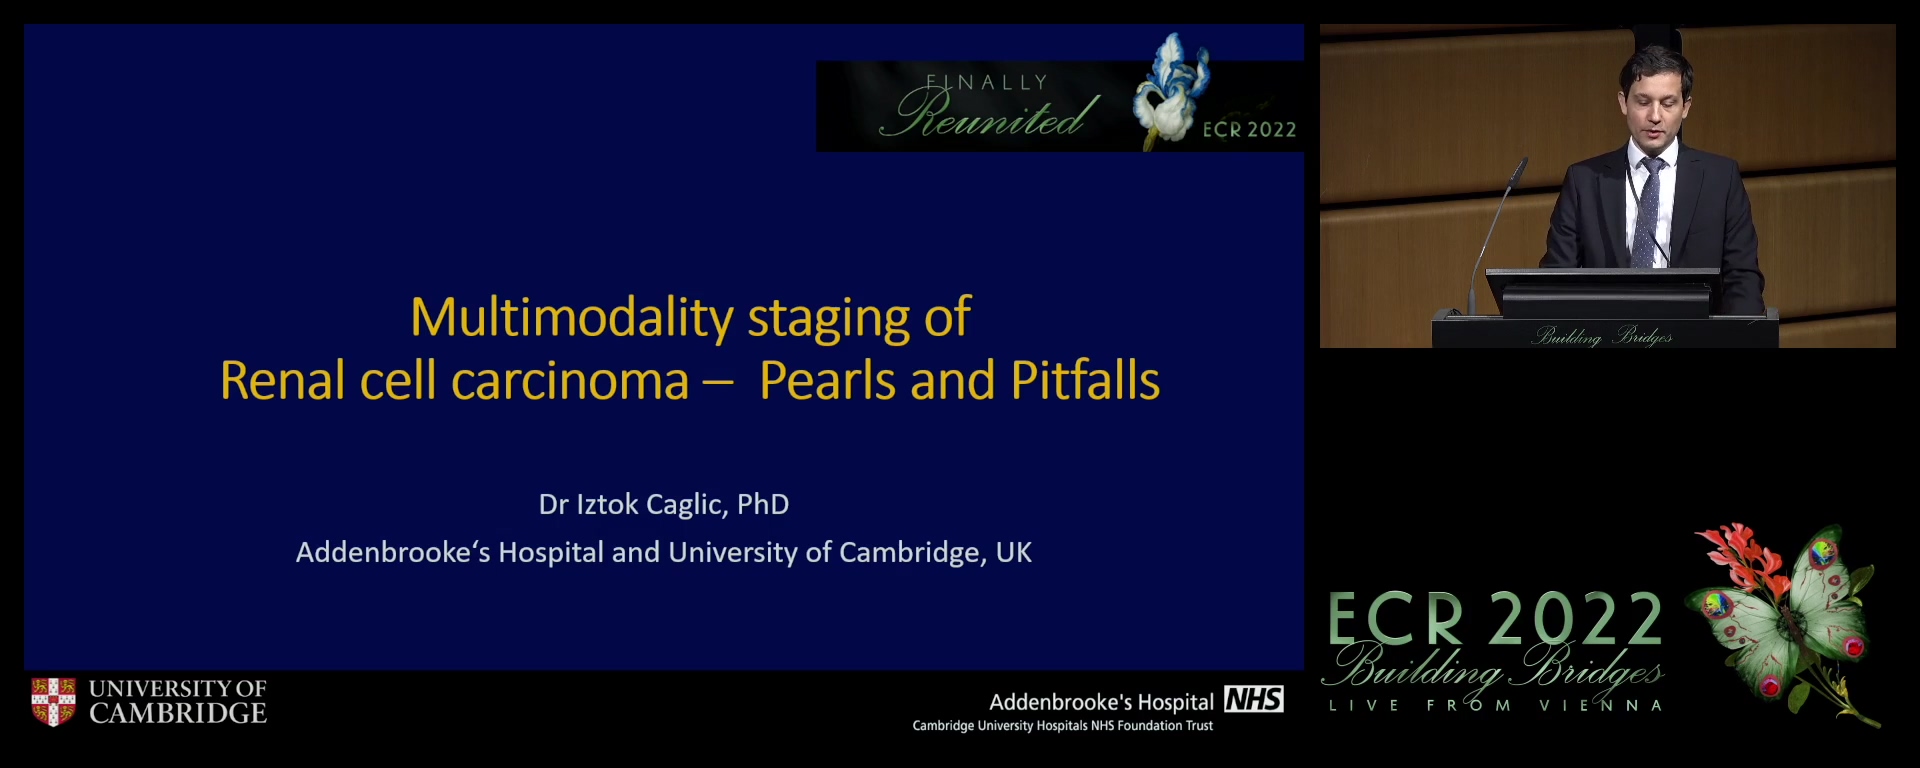 Multimodality staging of renal cell carcinoma: pearls and pitfalls - Iztok Caglic, Cambridge / UK